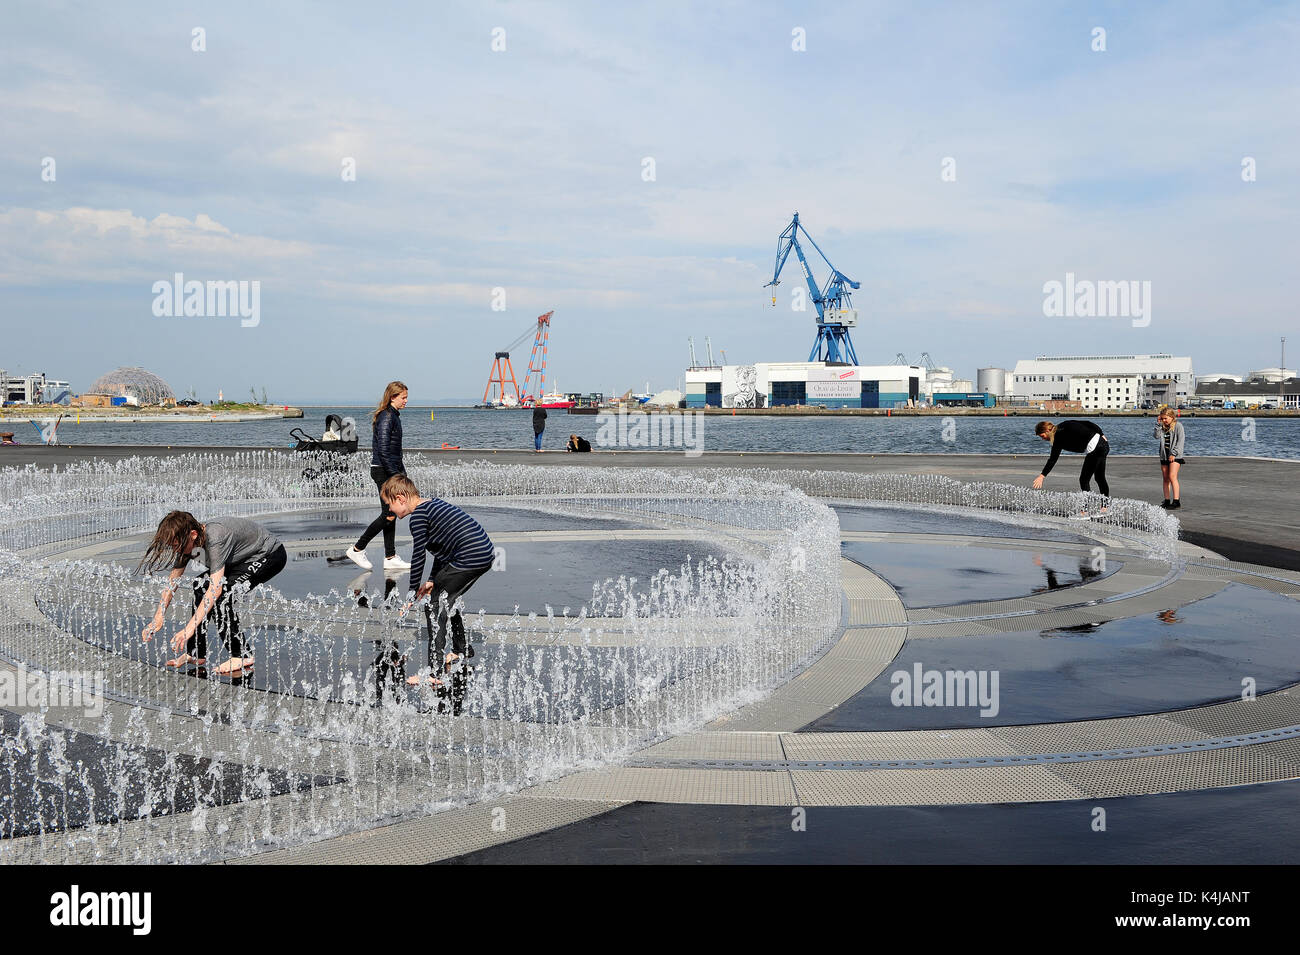 Children playing in the new Endless Connection installation by artist Jeppe Hein on the waterfront in Aarhus. Stock Photo